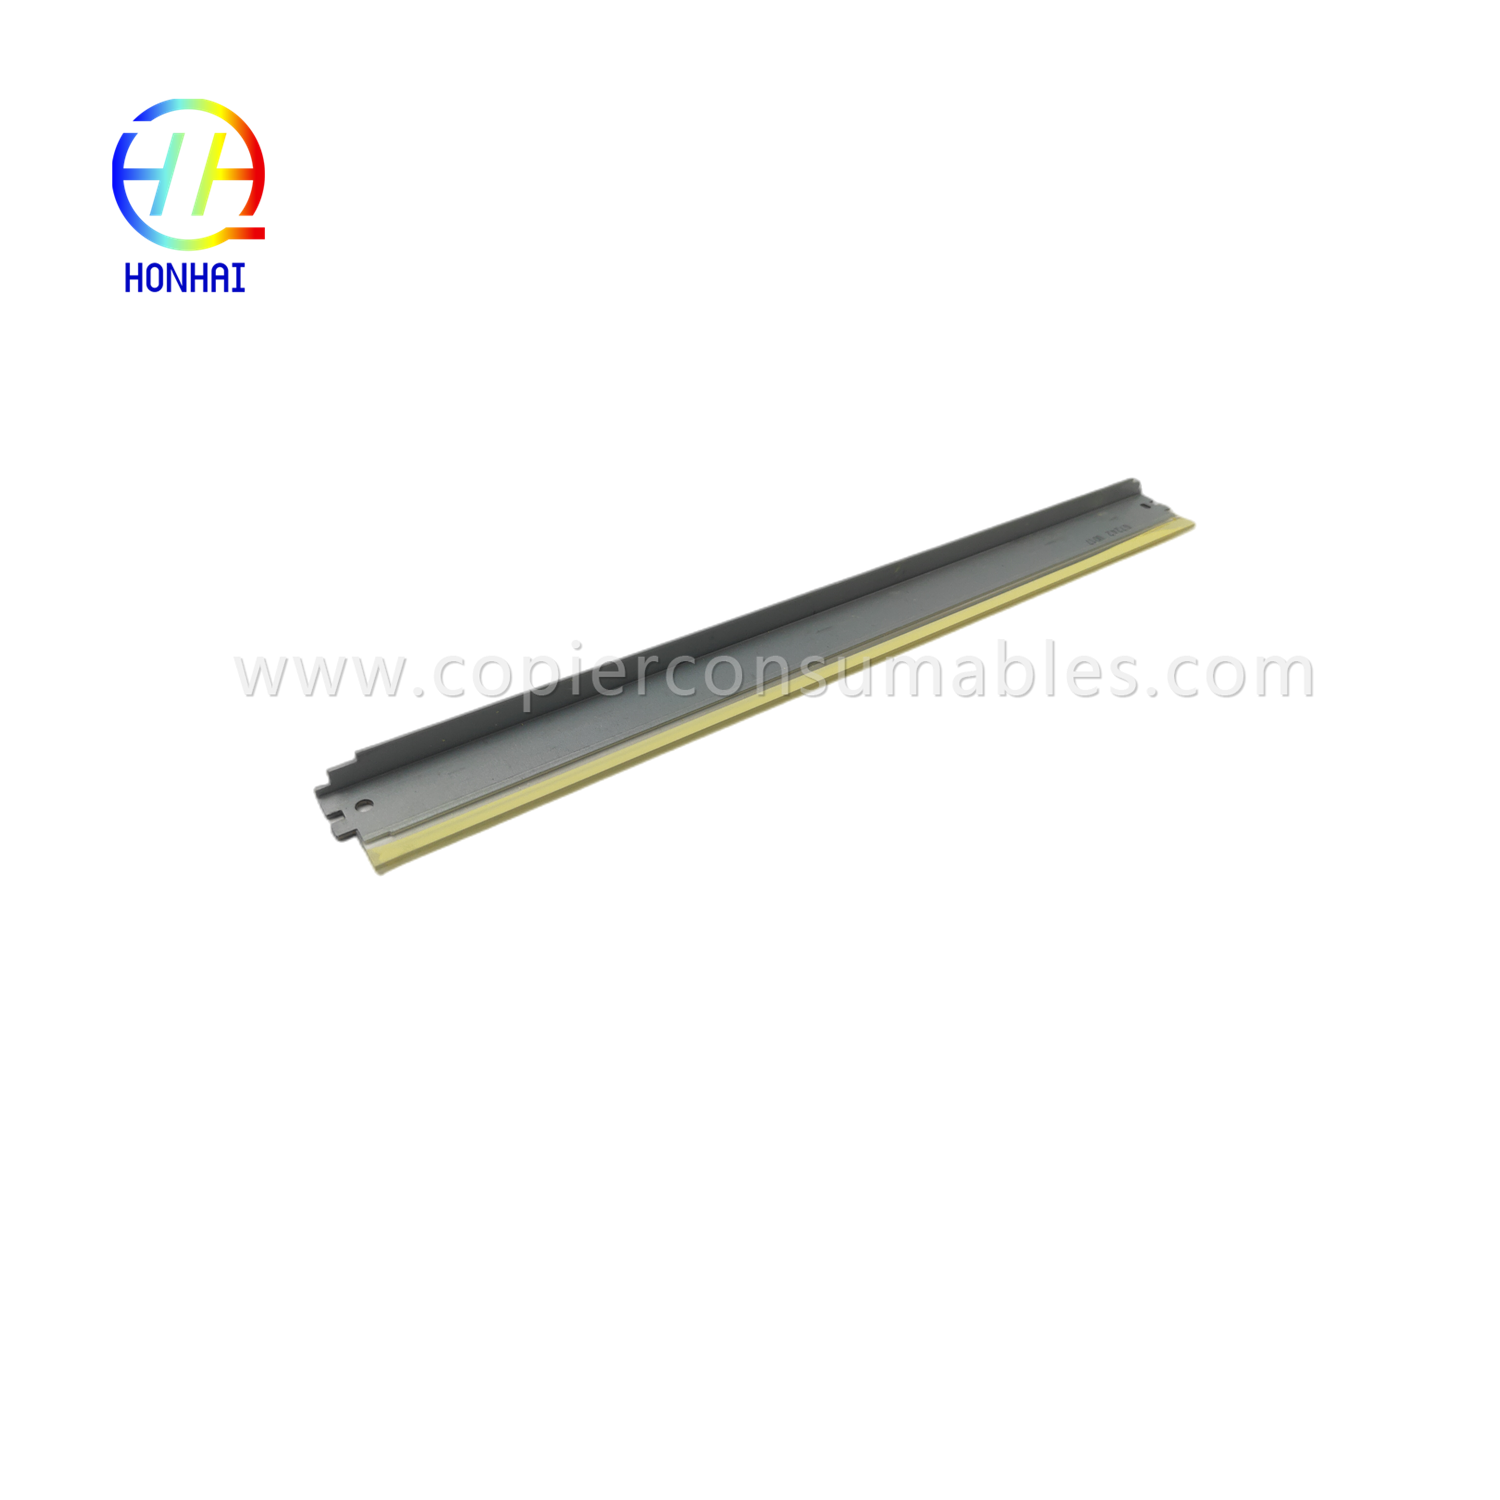 https://c585.goodo.net/drum-cleaning-blade-for-canon-ir1600-1610-2000-2016-2020-2320-ምርት/